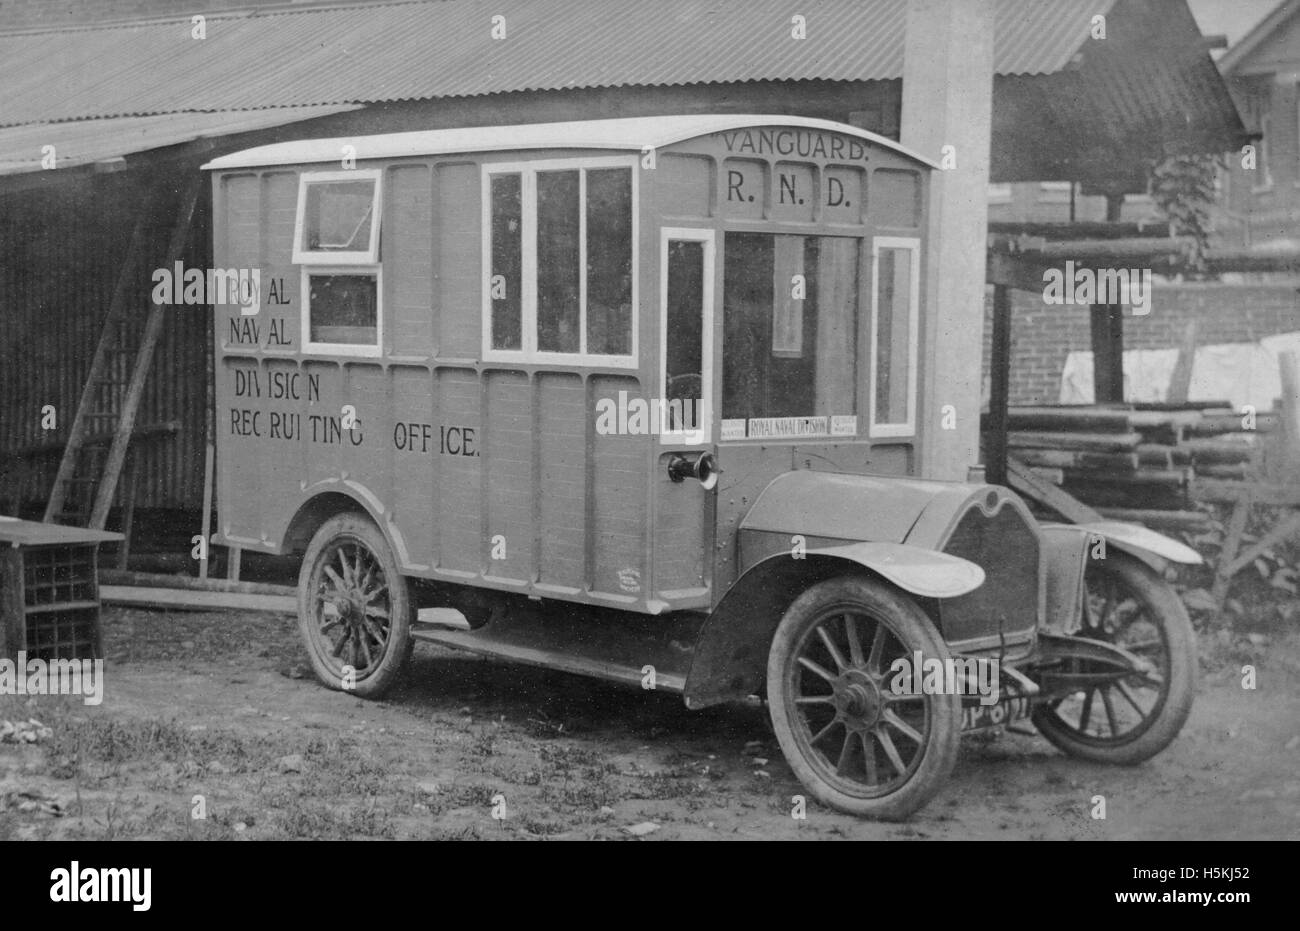 Crossley 1915 mobile Royal Naval Division Recruiting Office. Konvertierung von Hutchings Stockfoto